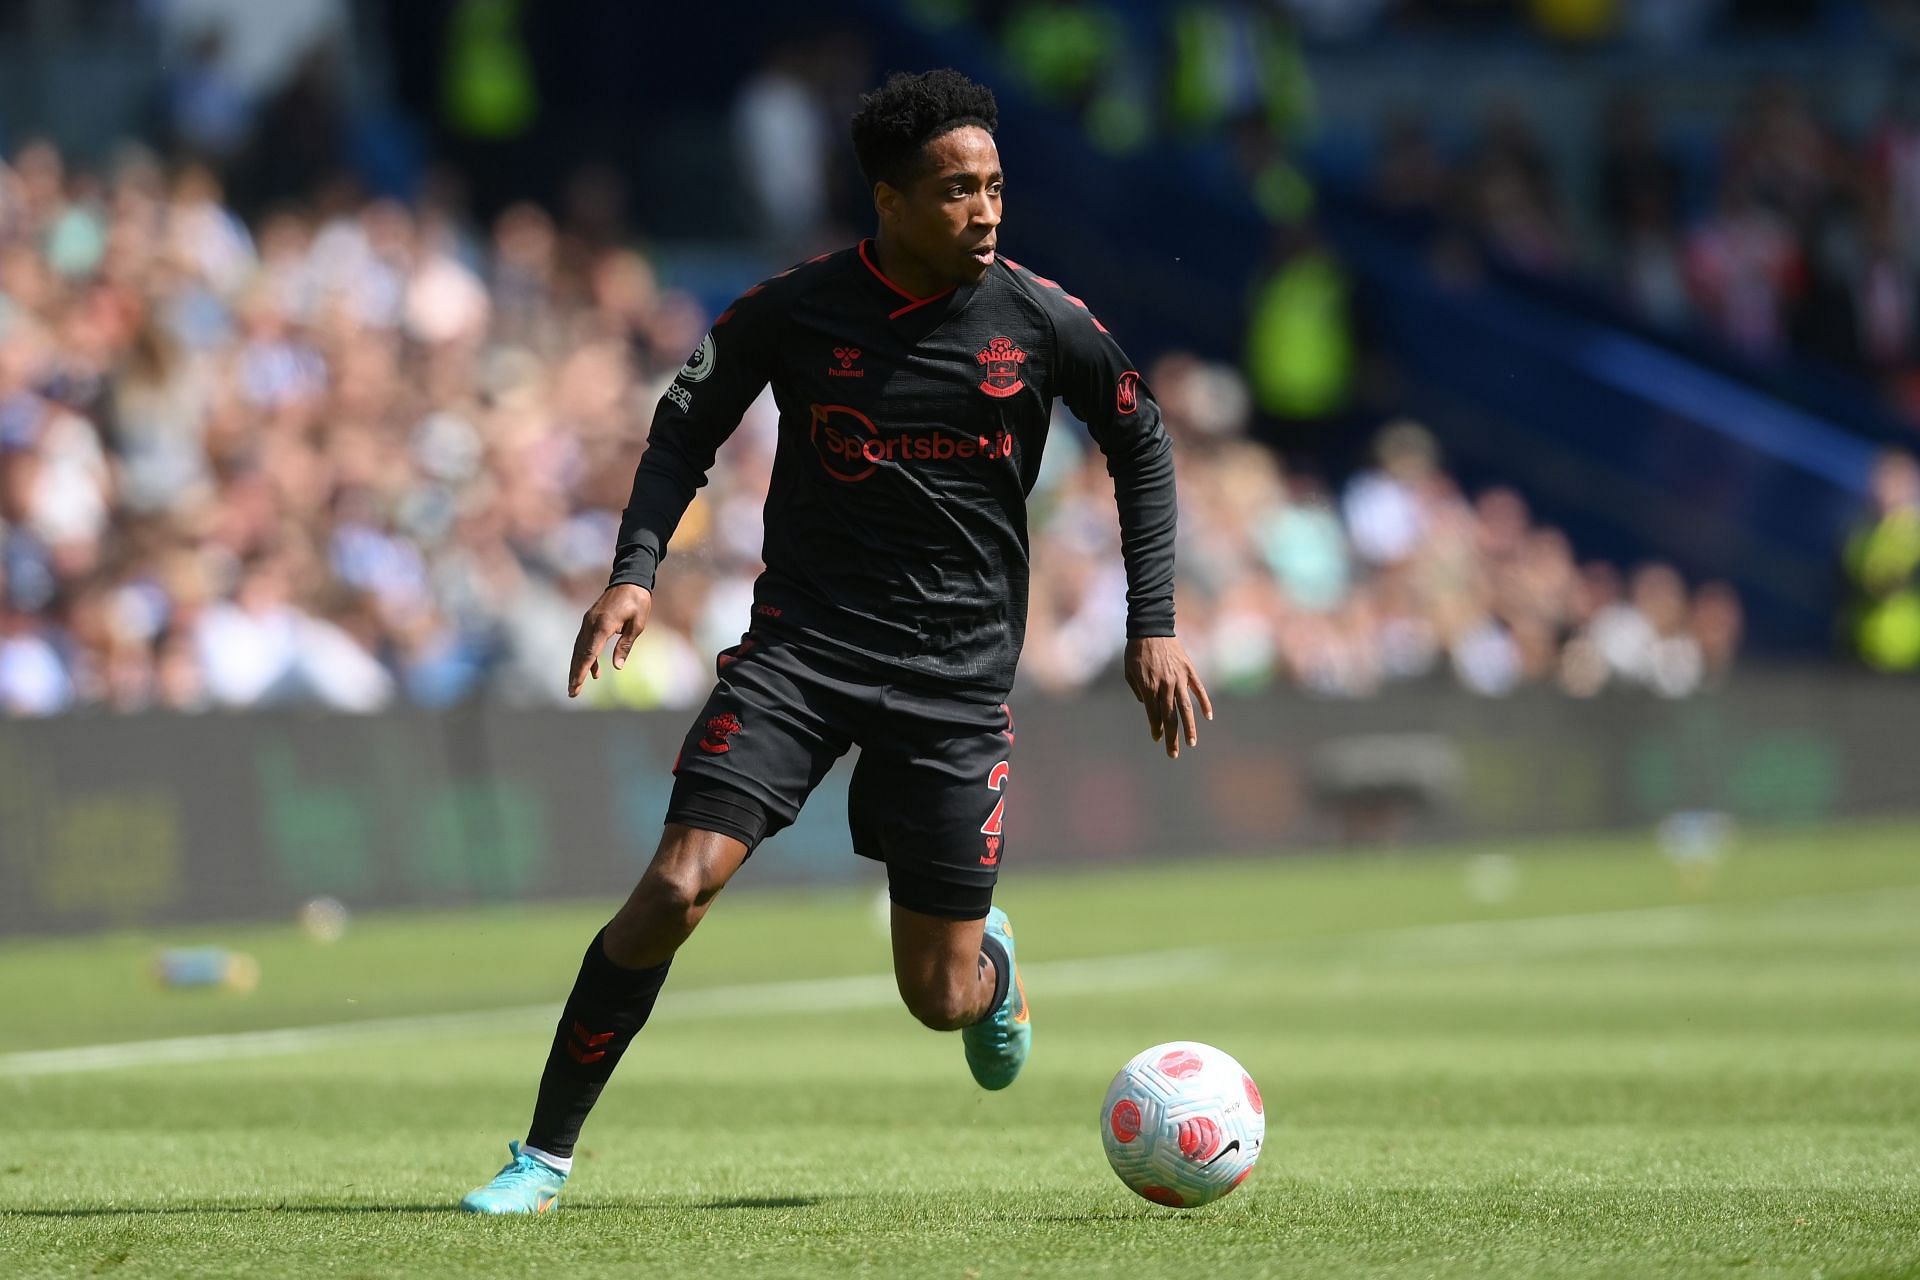 Kyle Walker-Peters could be an astute signing